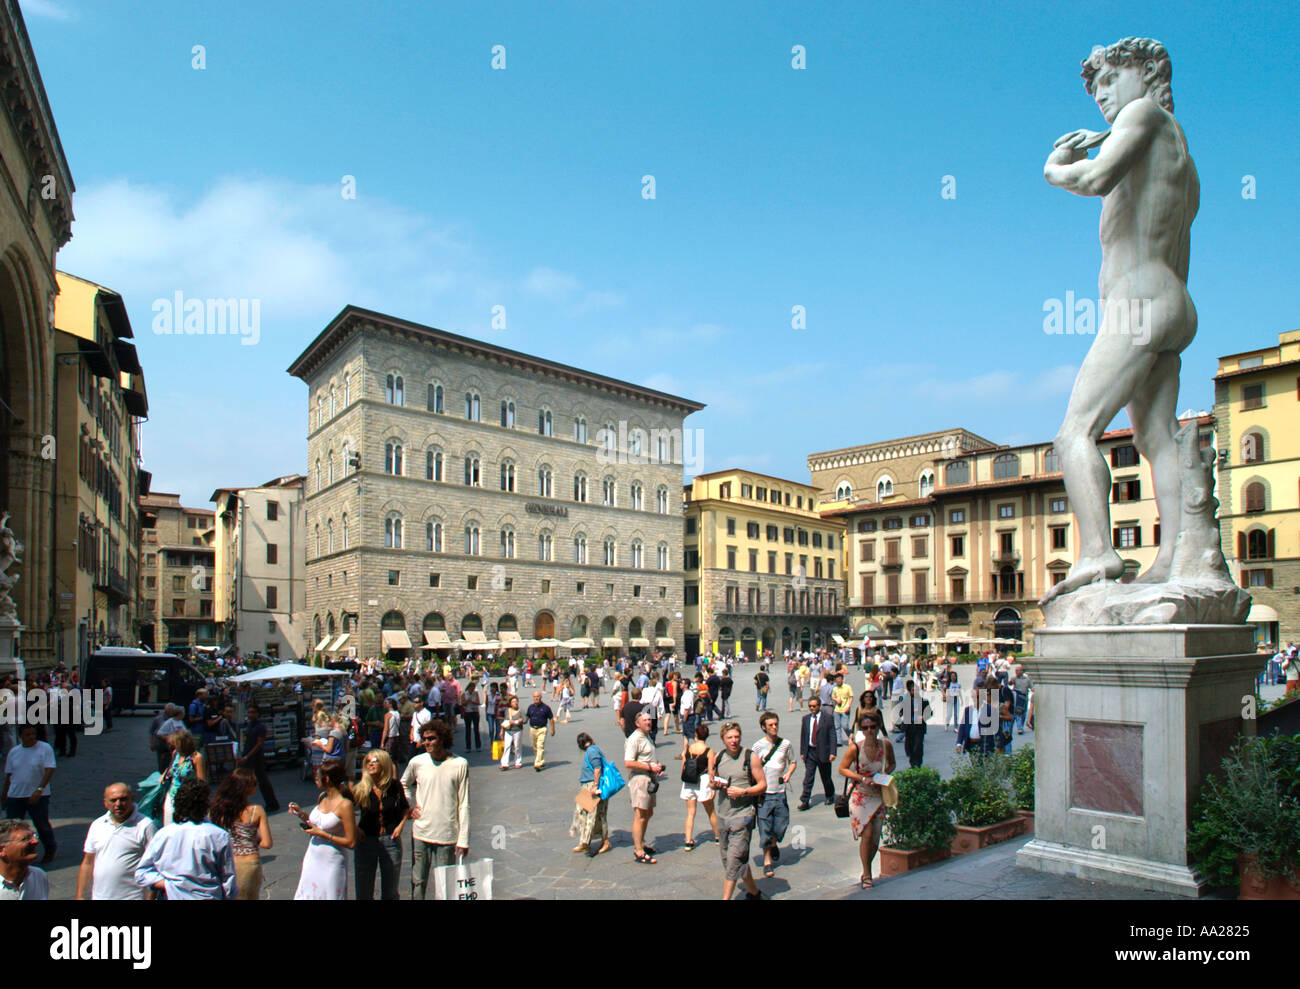 Piazza della Signoria with a copy of Michelangelo's State of David in the foreground, Florence, Tuscany, Italy Stock Photo